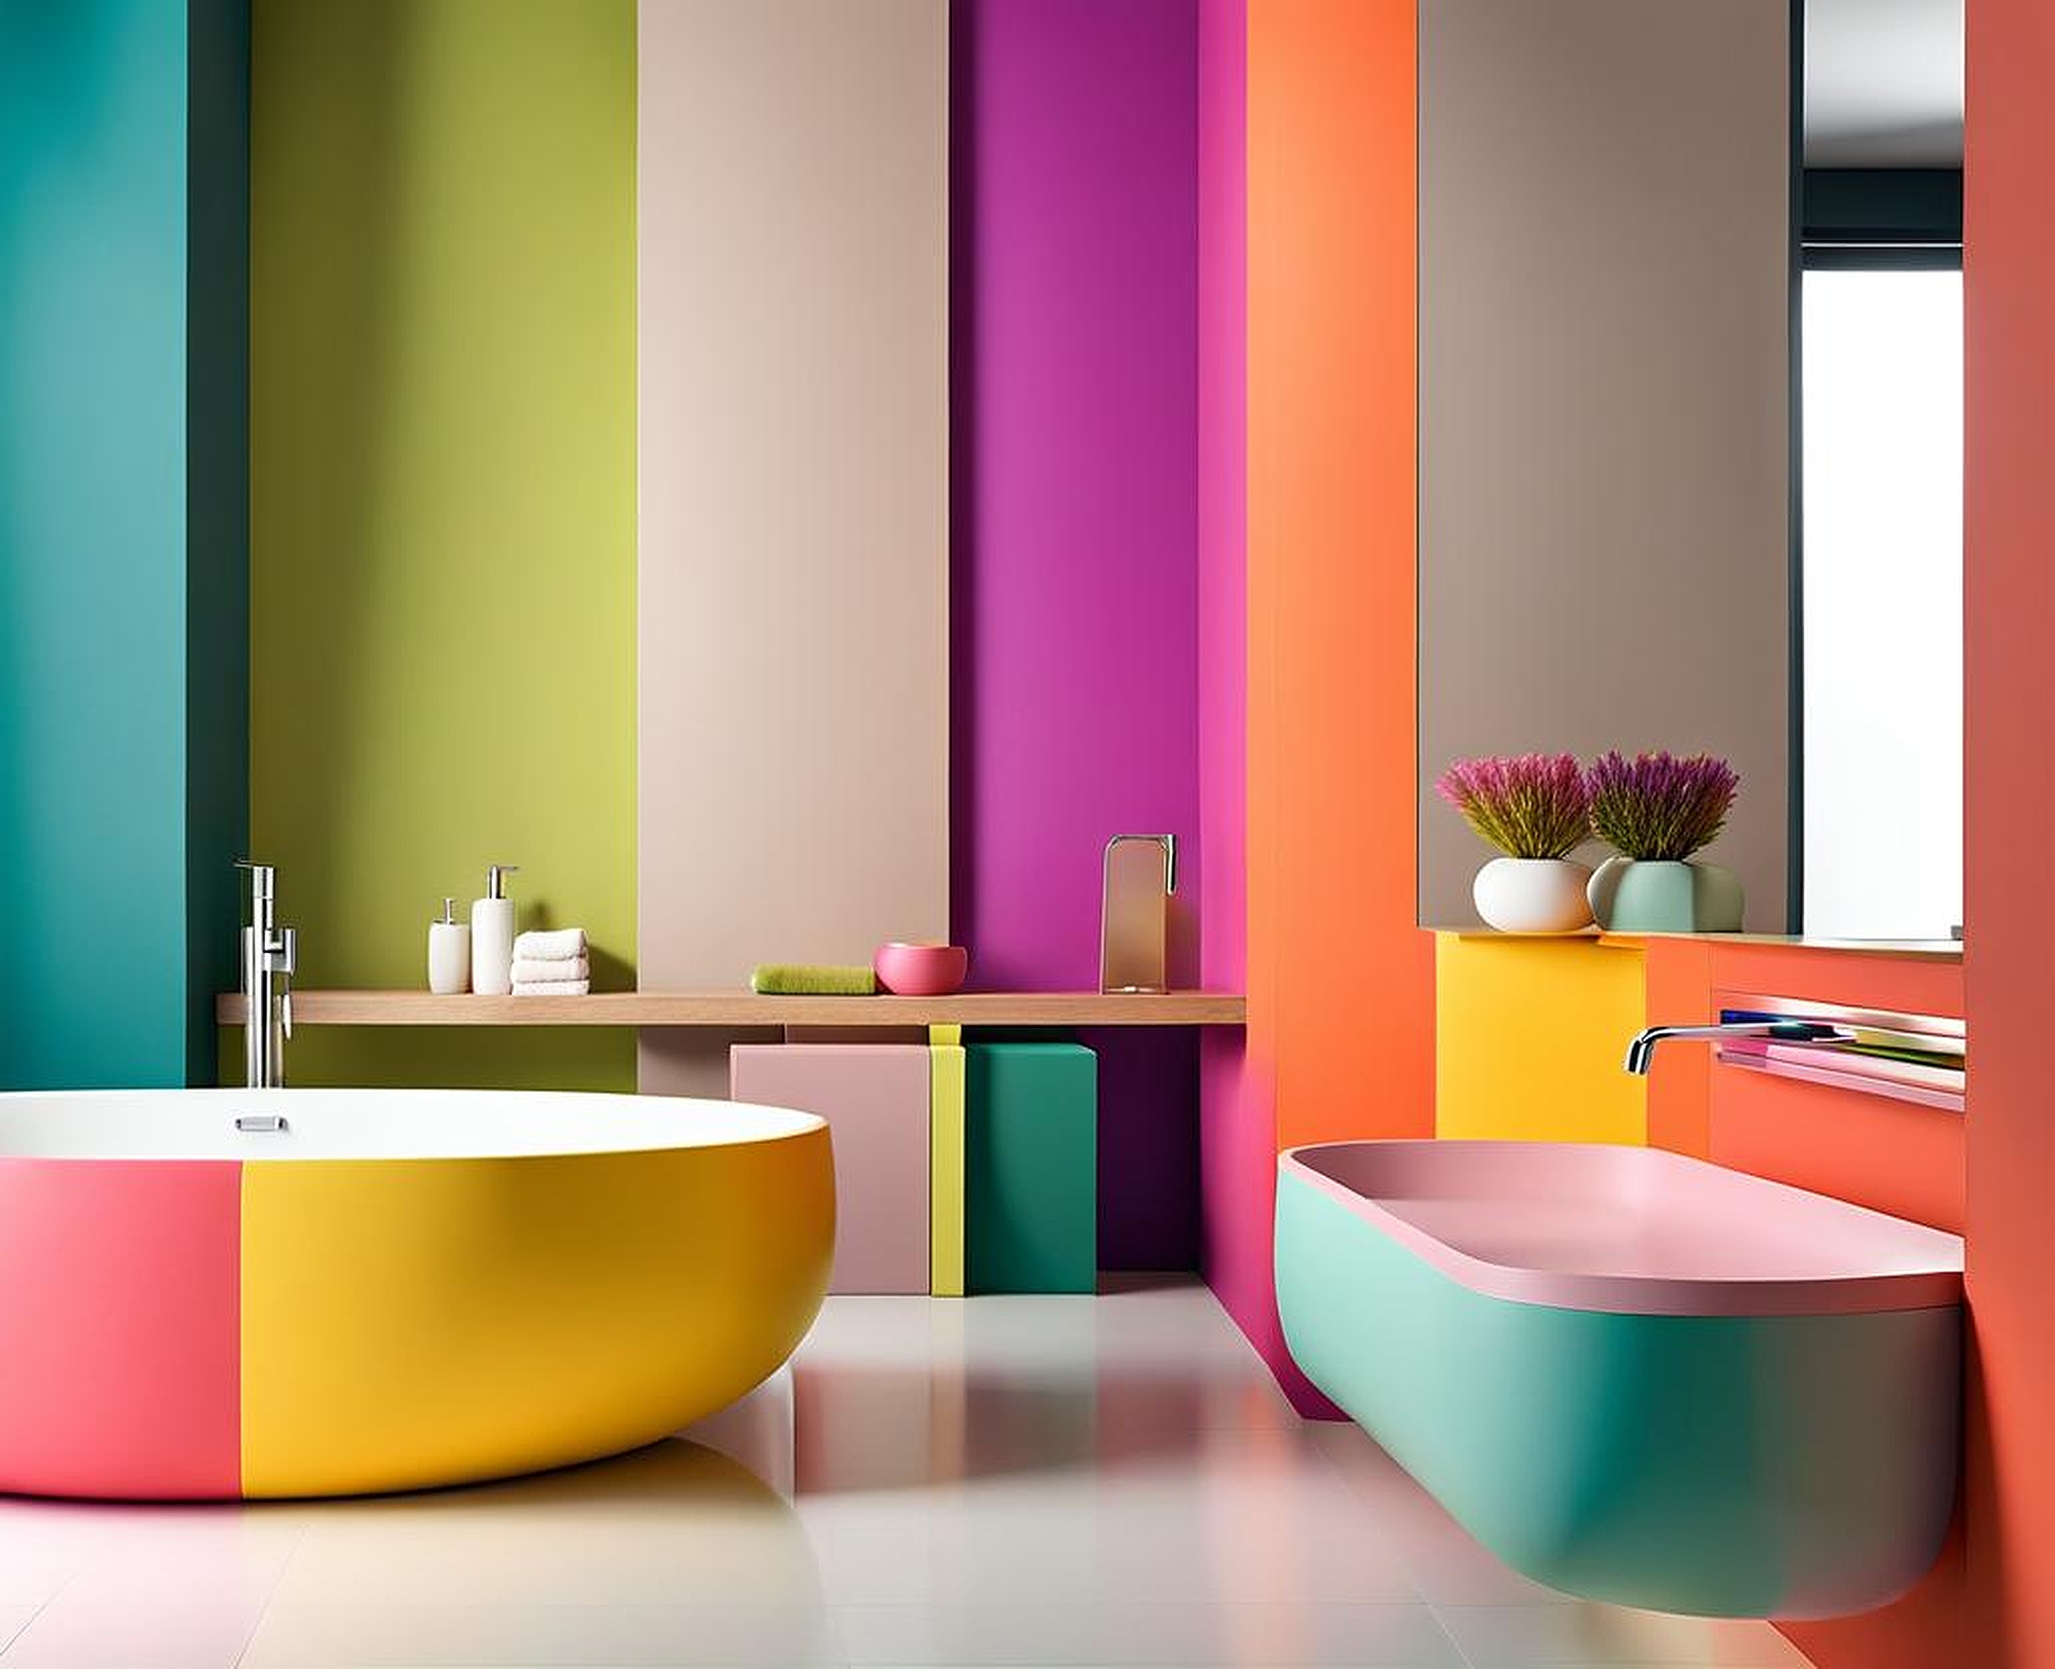 Bathroom Accessories in a Rainbow of Colours for a Unique Vibe